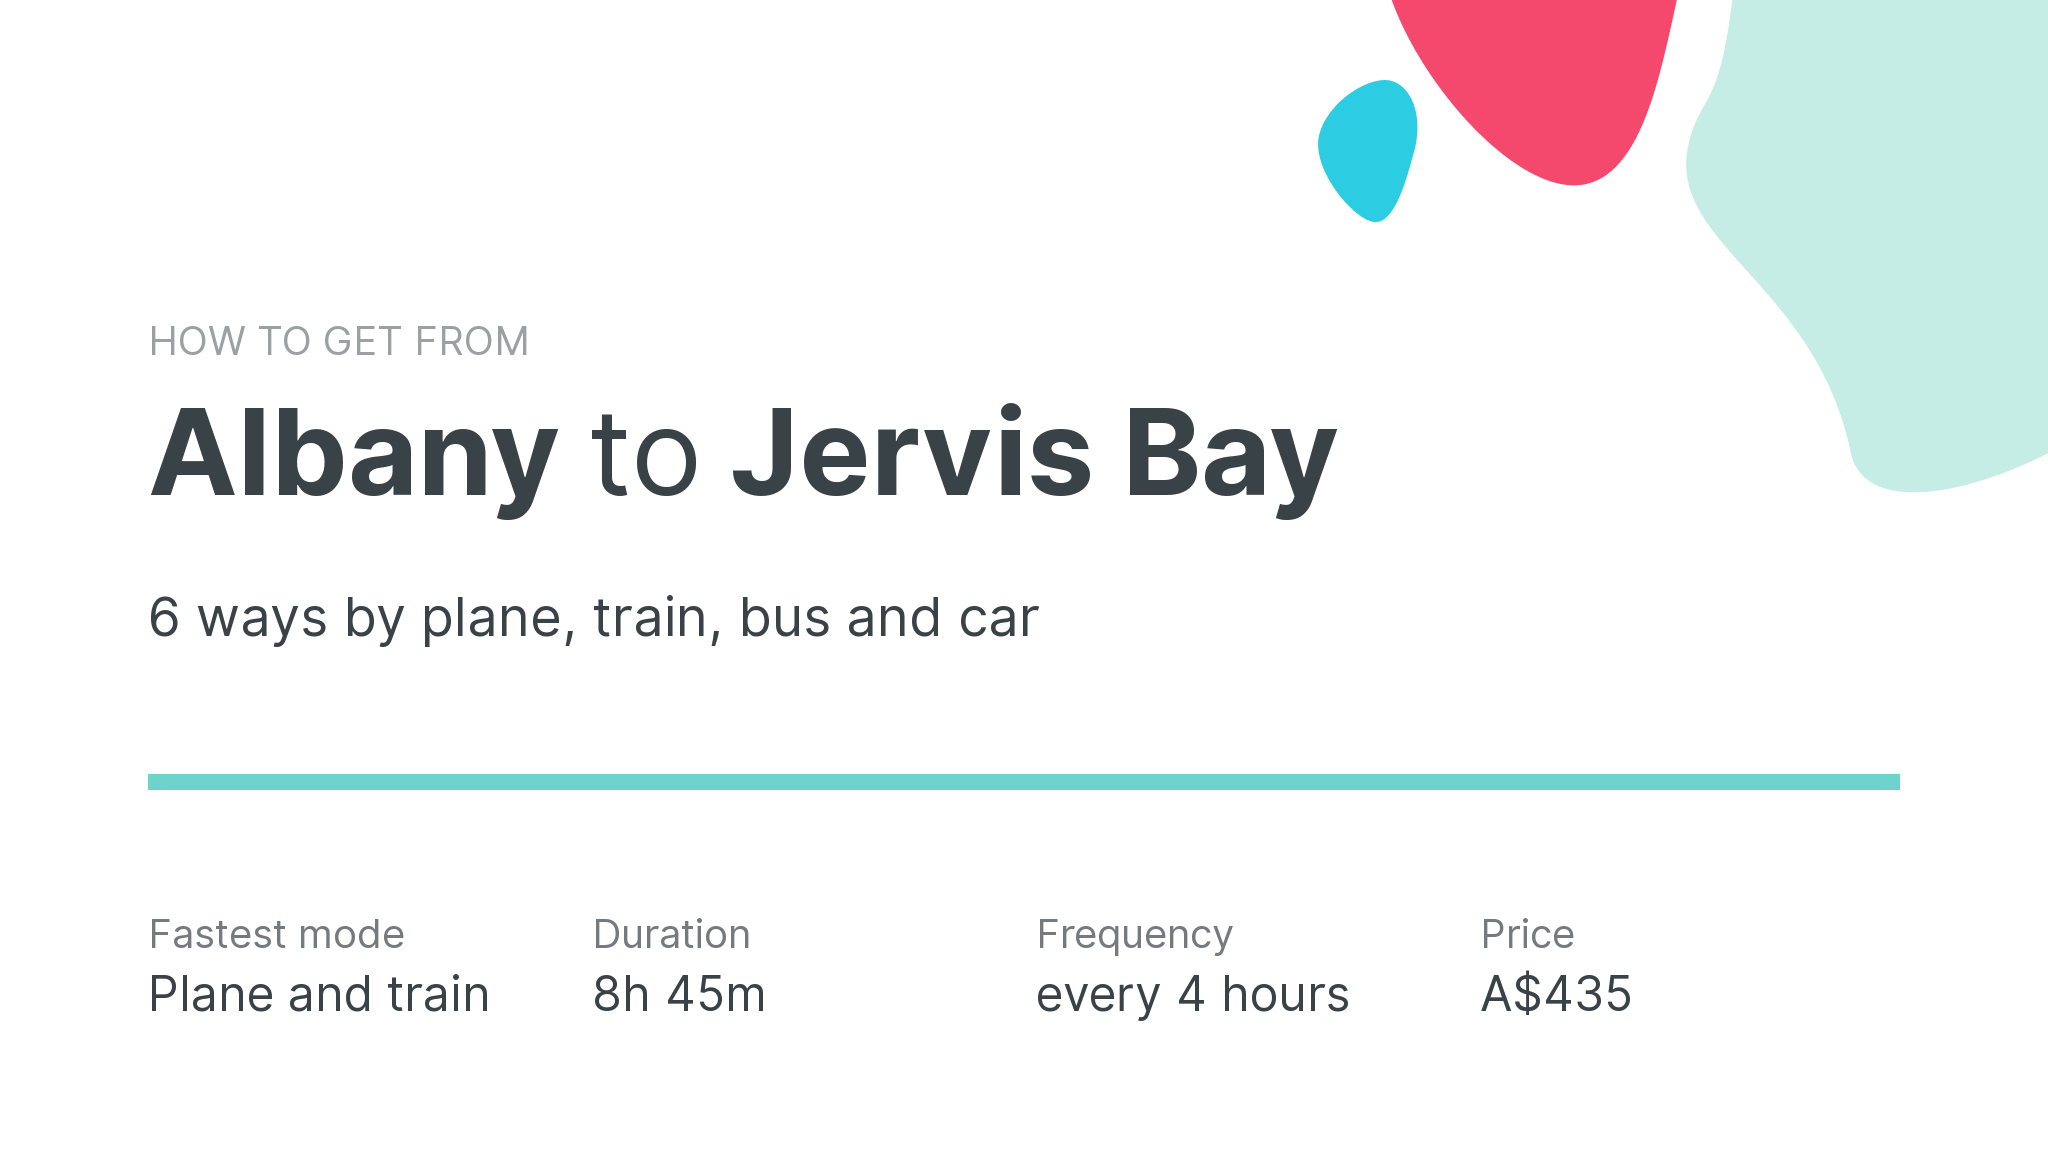 How do I get from Albany to Jervis Bay